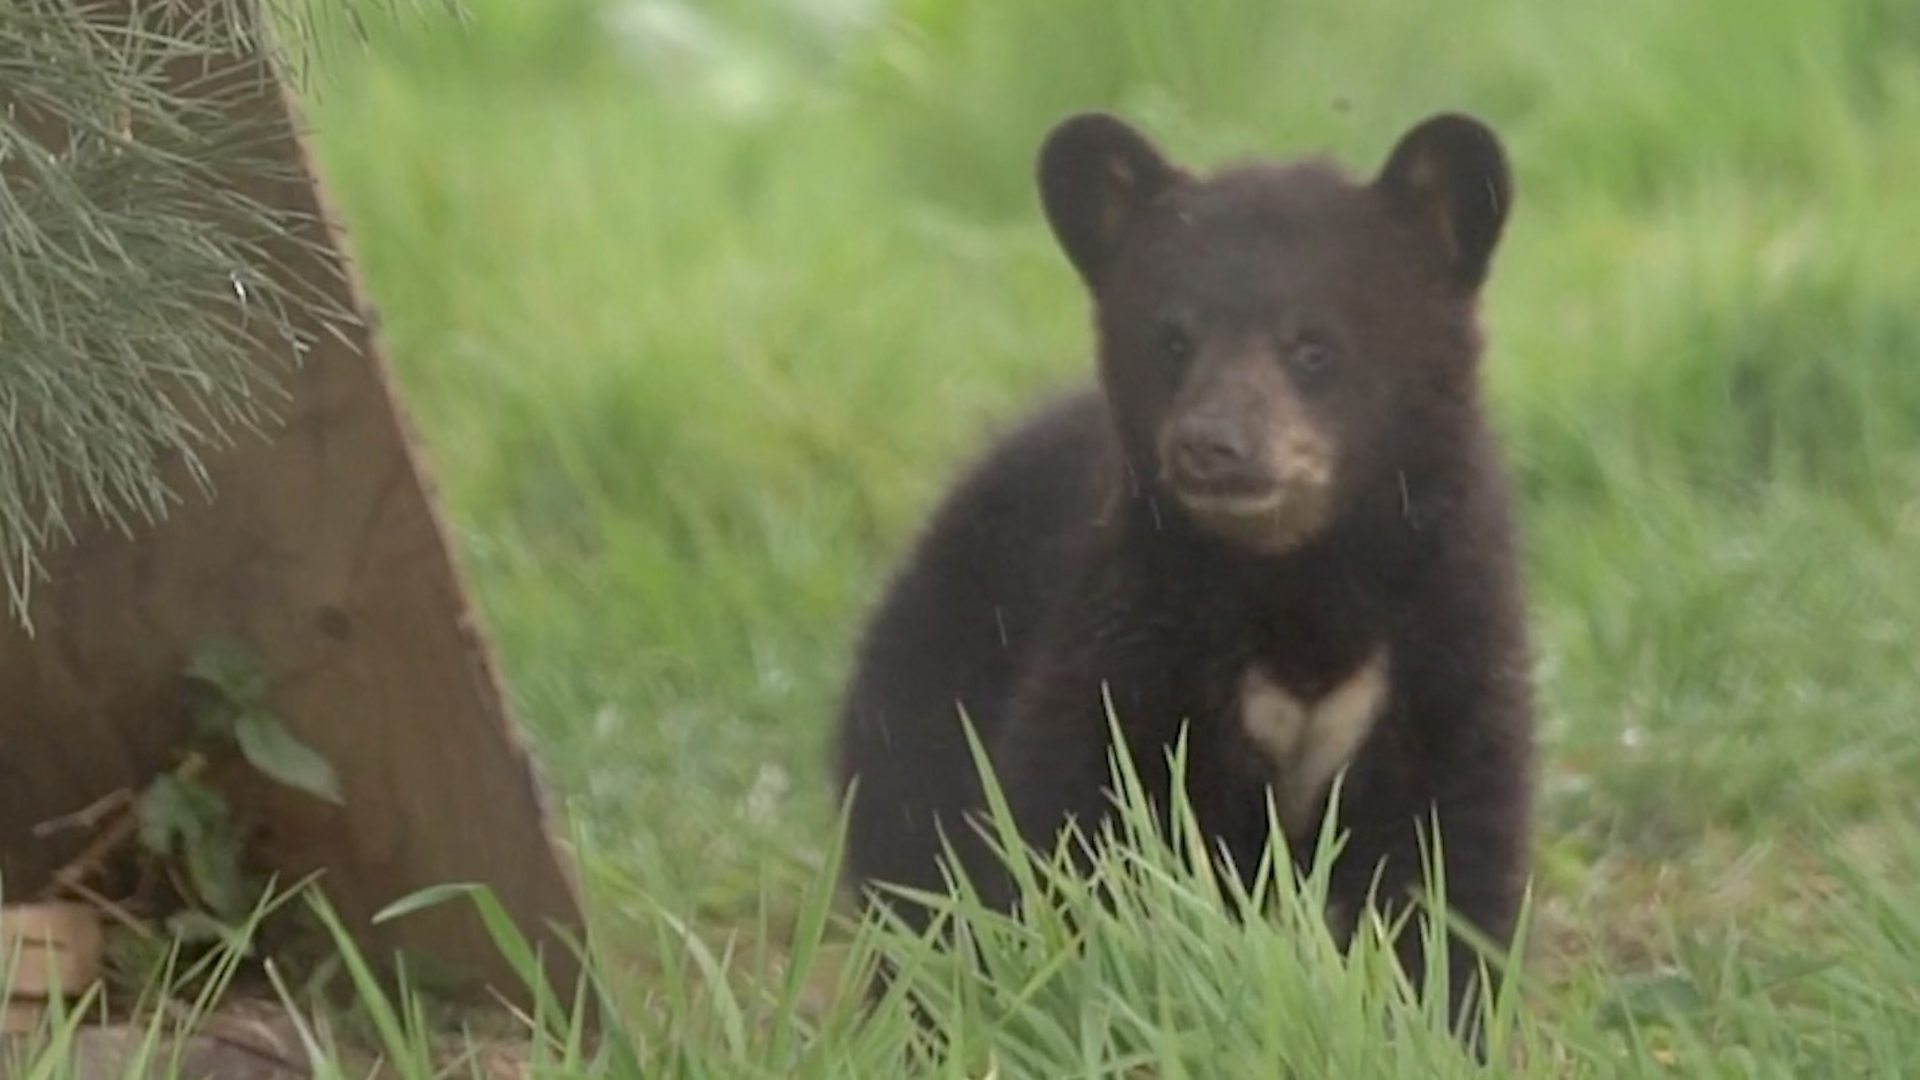 Woburn's black bear cubs take first steps out of den - BBC News